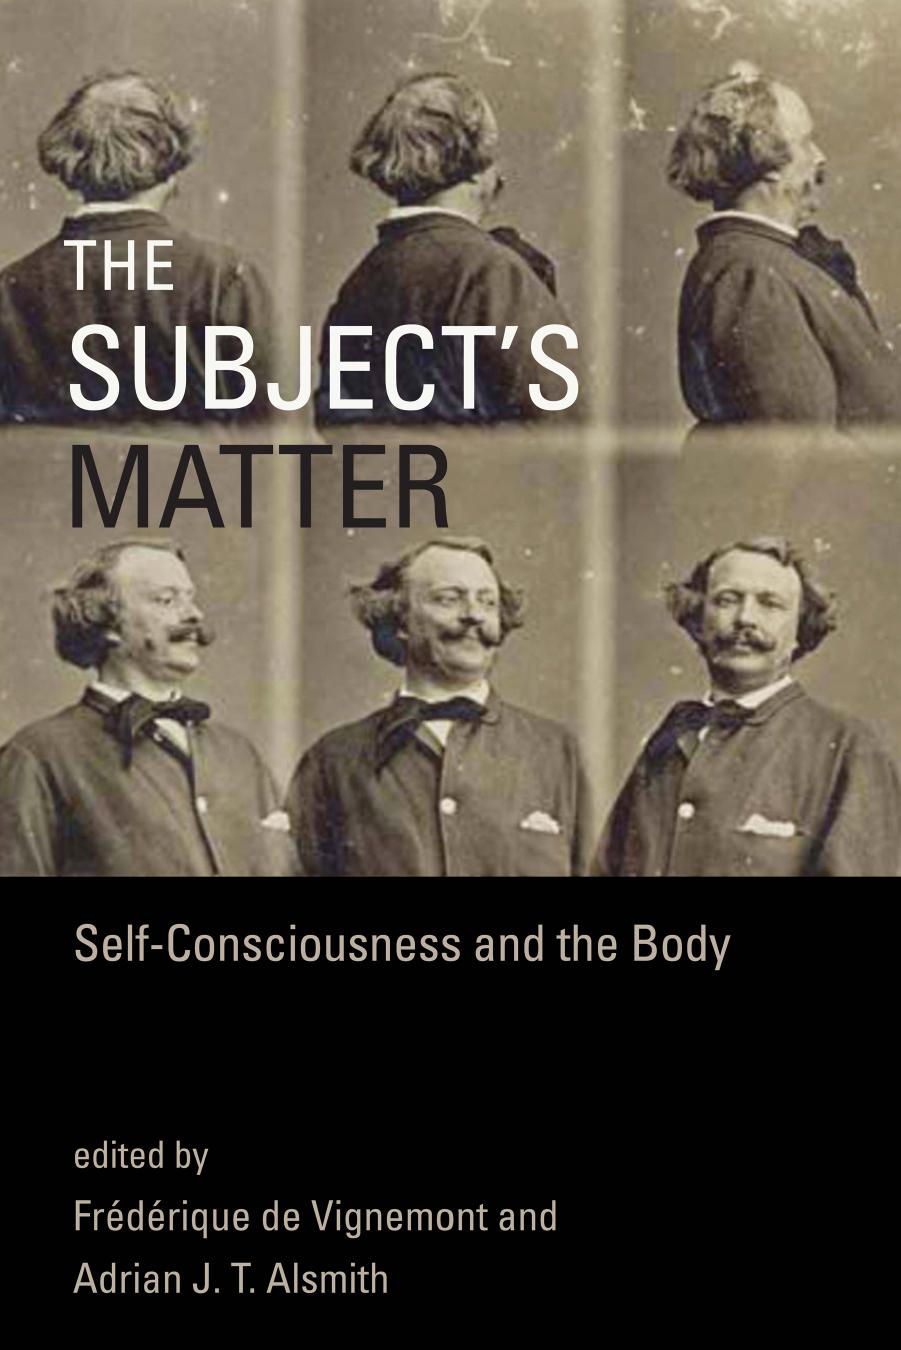 The Subject's Matter: Self-Consciousness and the Body by Adrian J. T. Alsmith